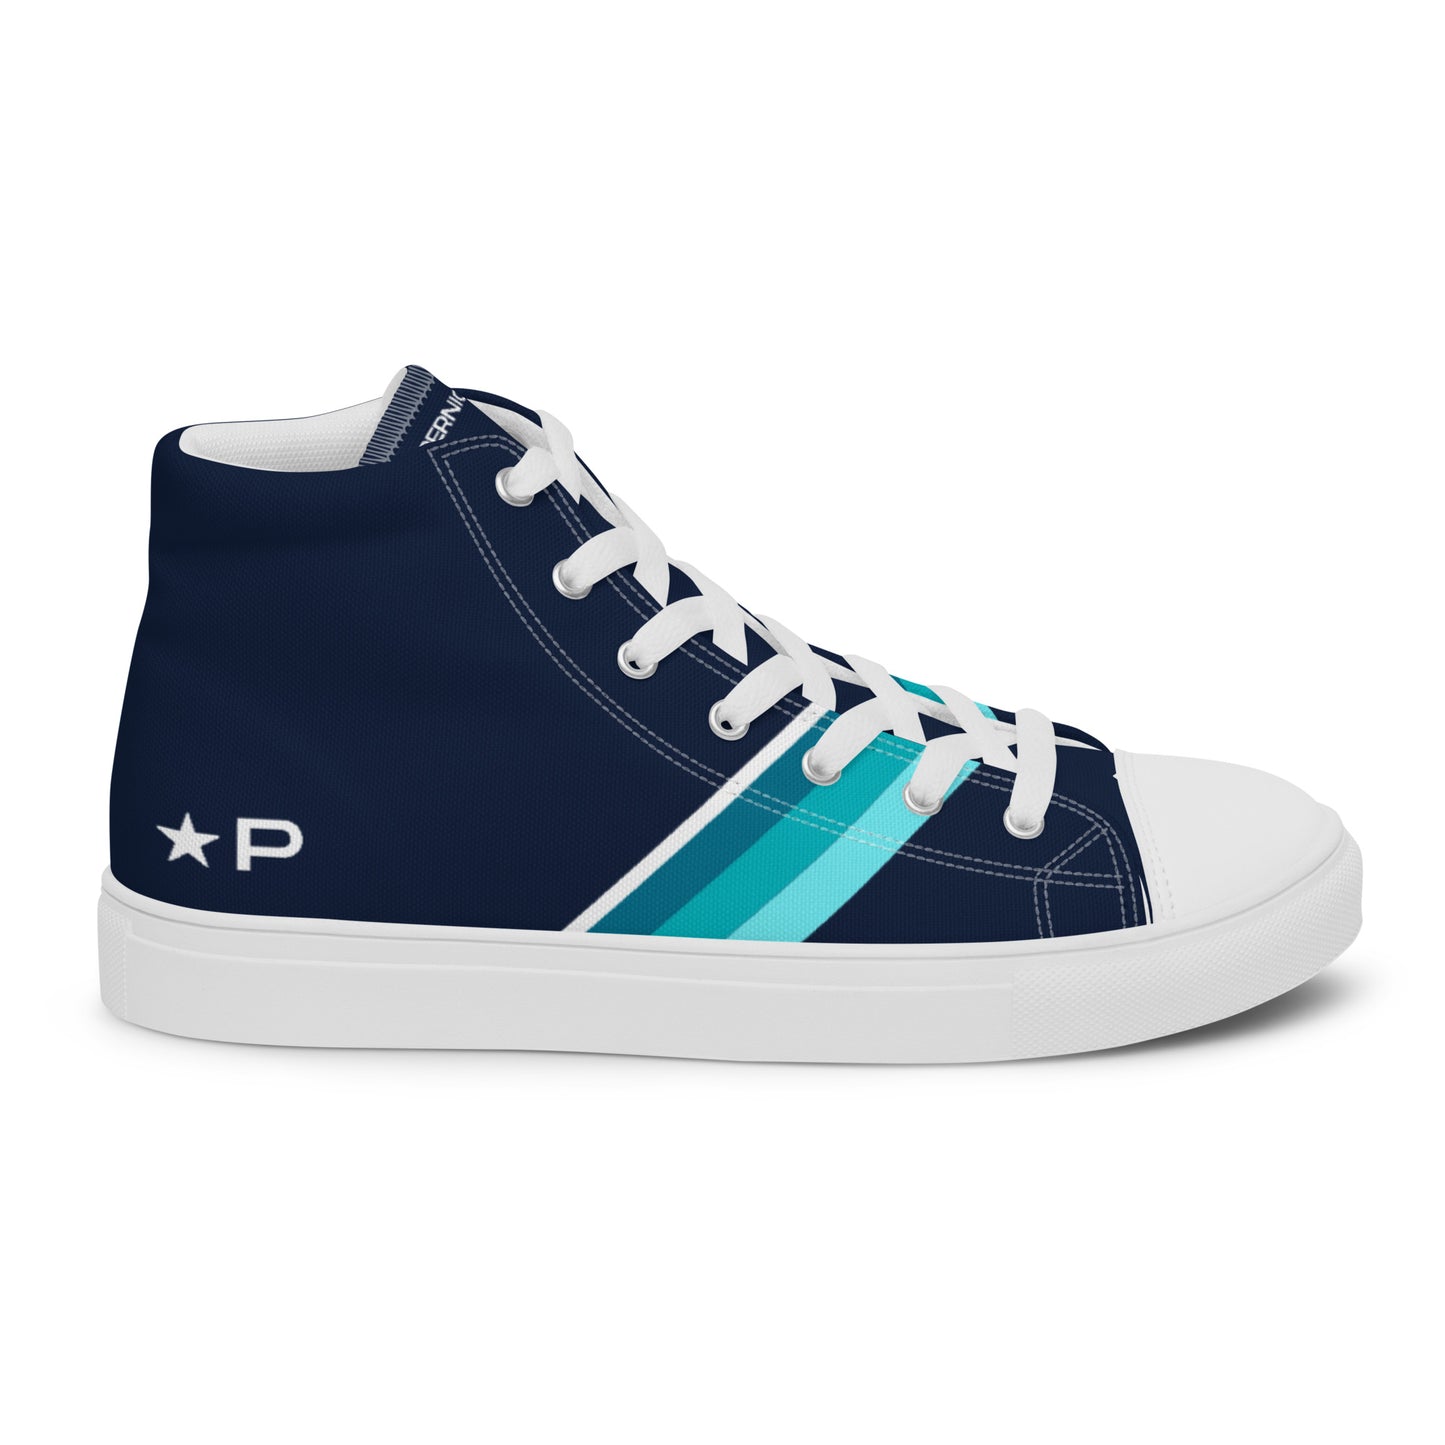 Men’s high top canvas shoes Star P5 NAVY